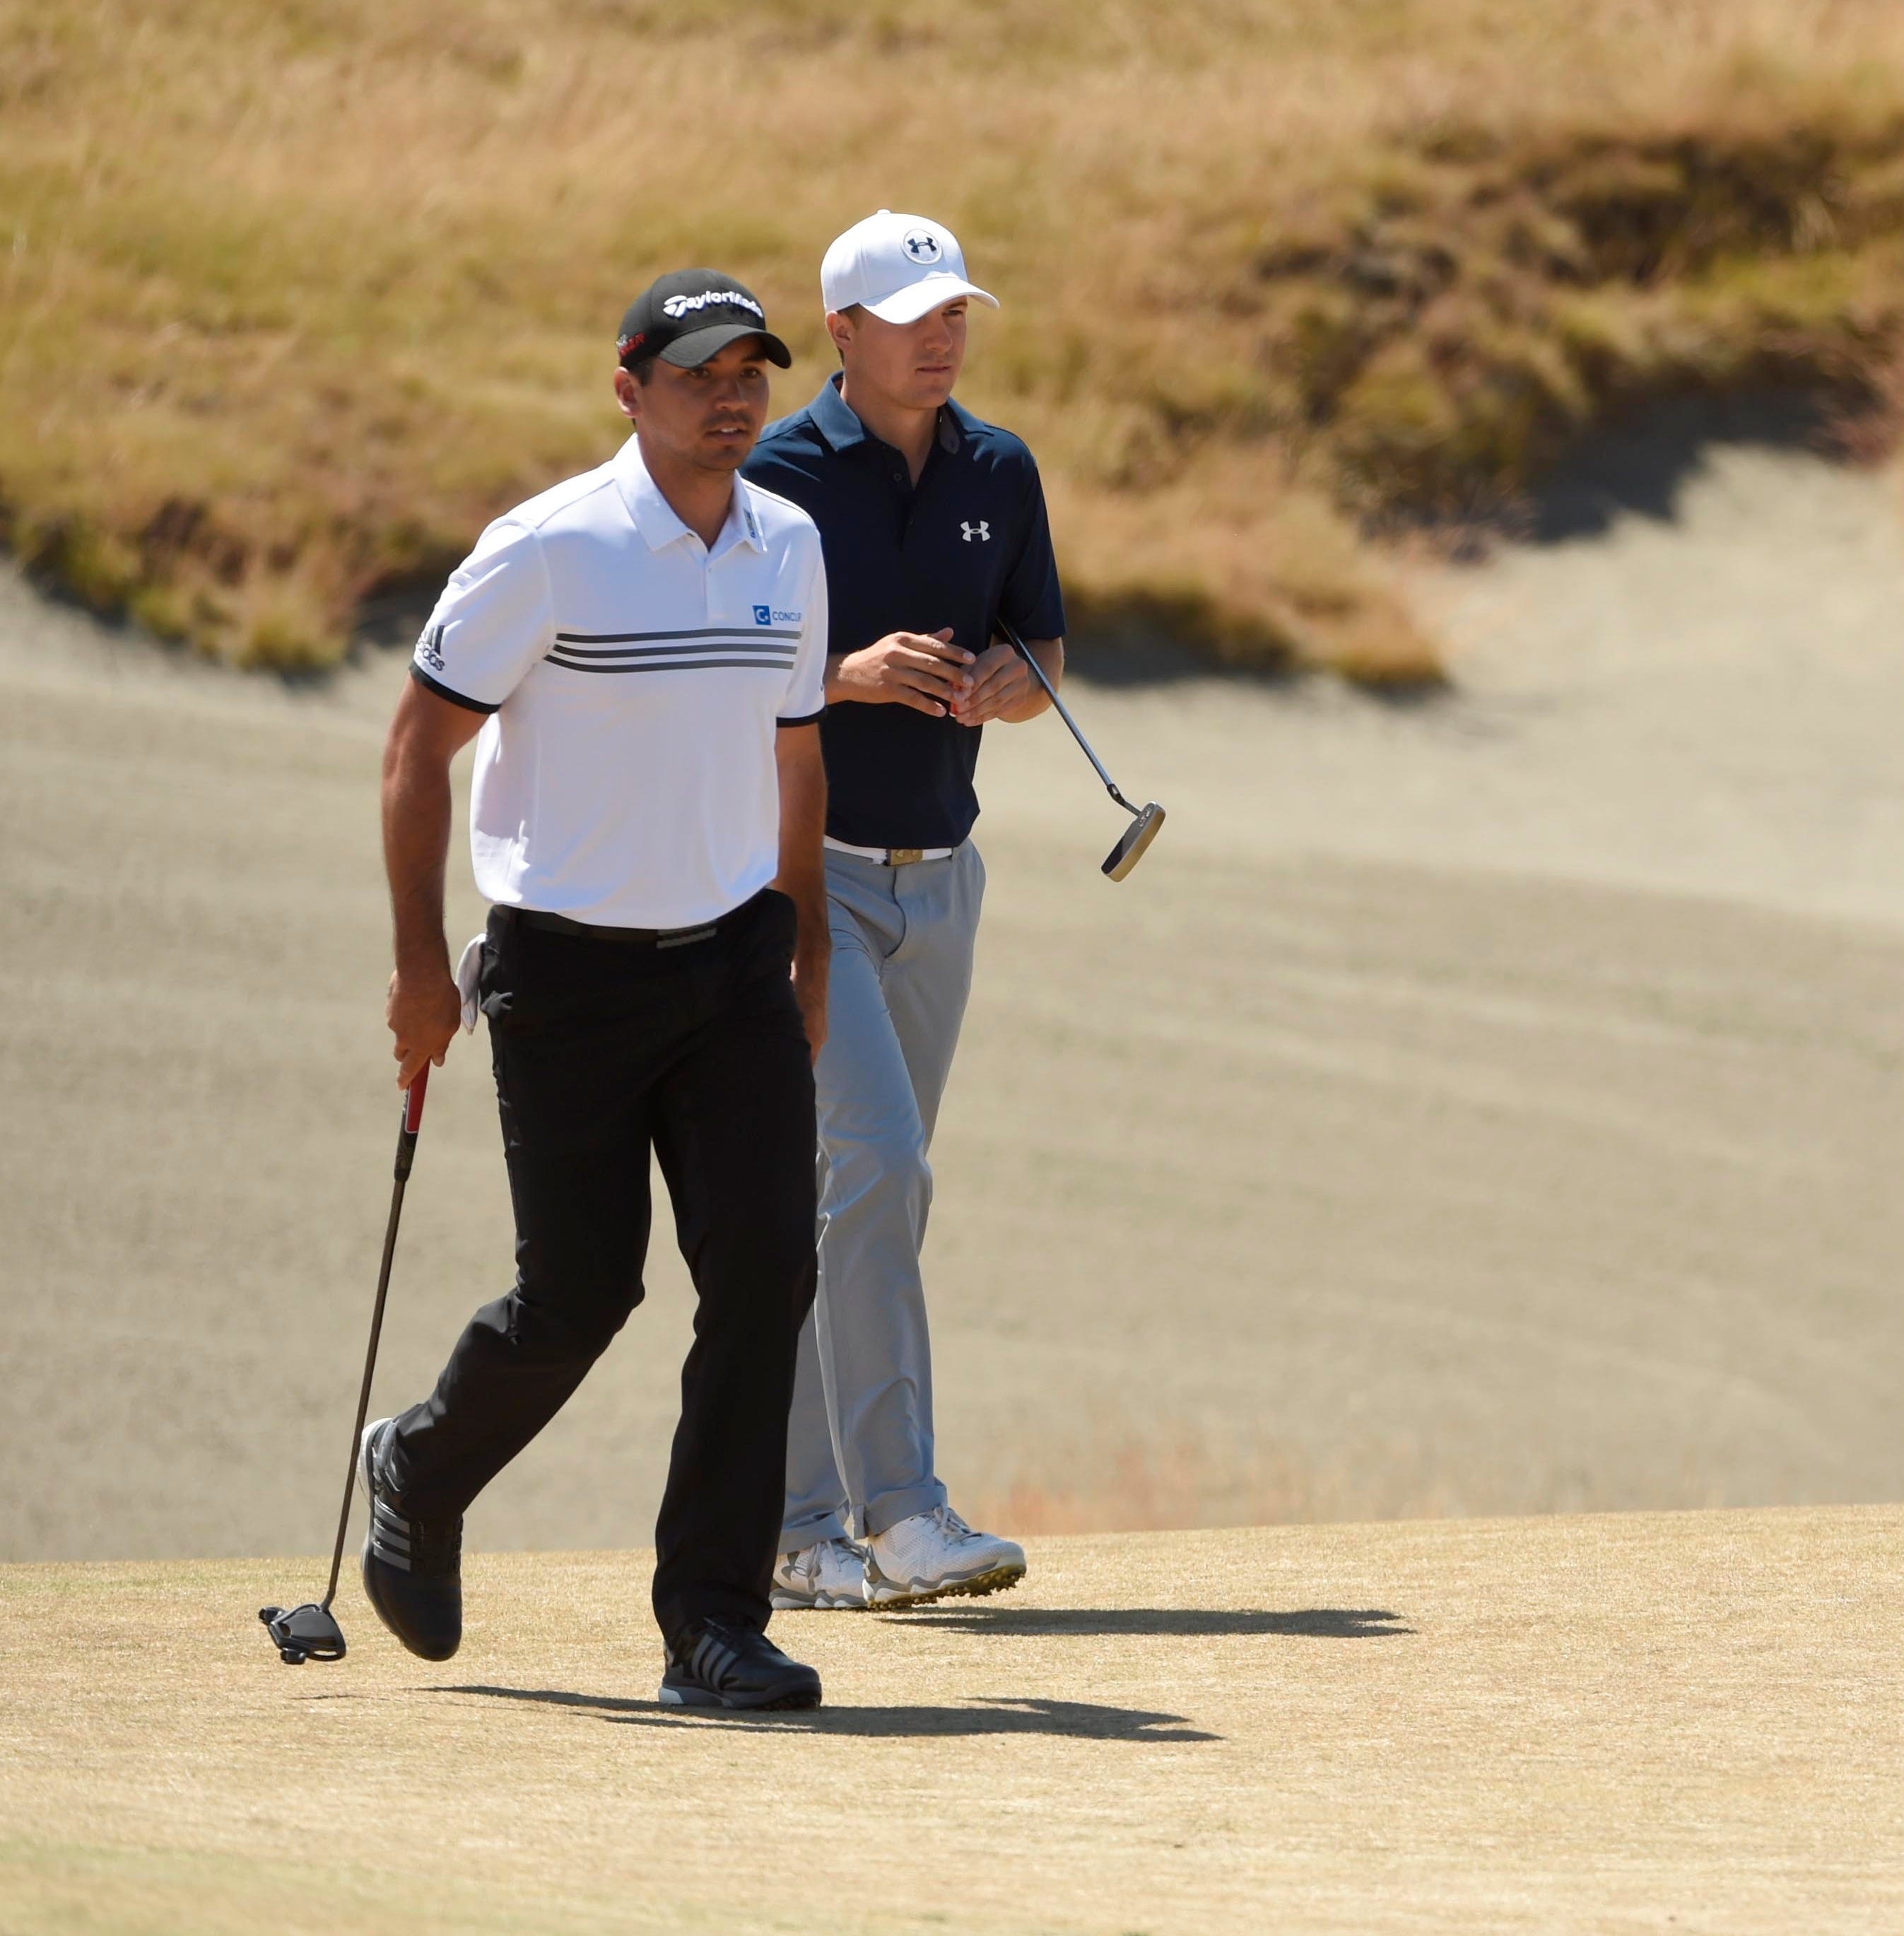 It will be Jason Day&apos;s day come Sunday in the U.S. Open